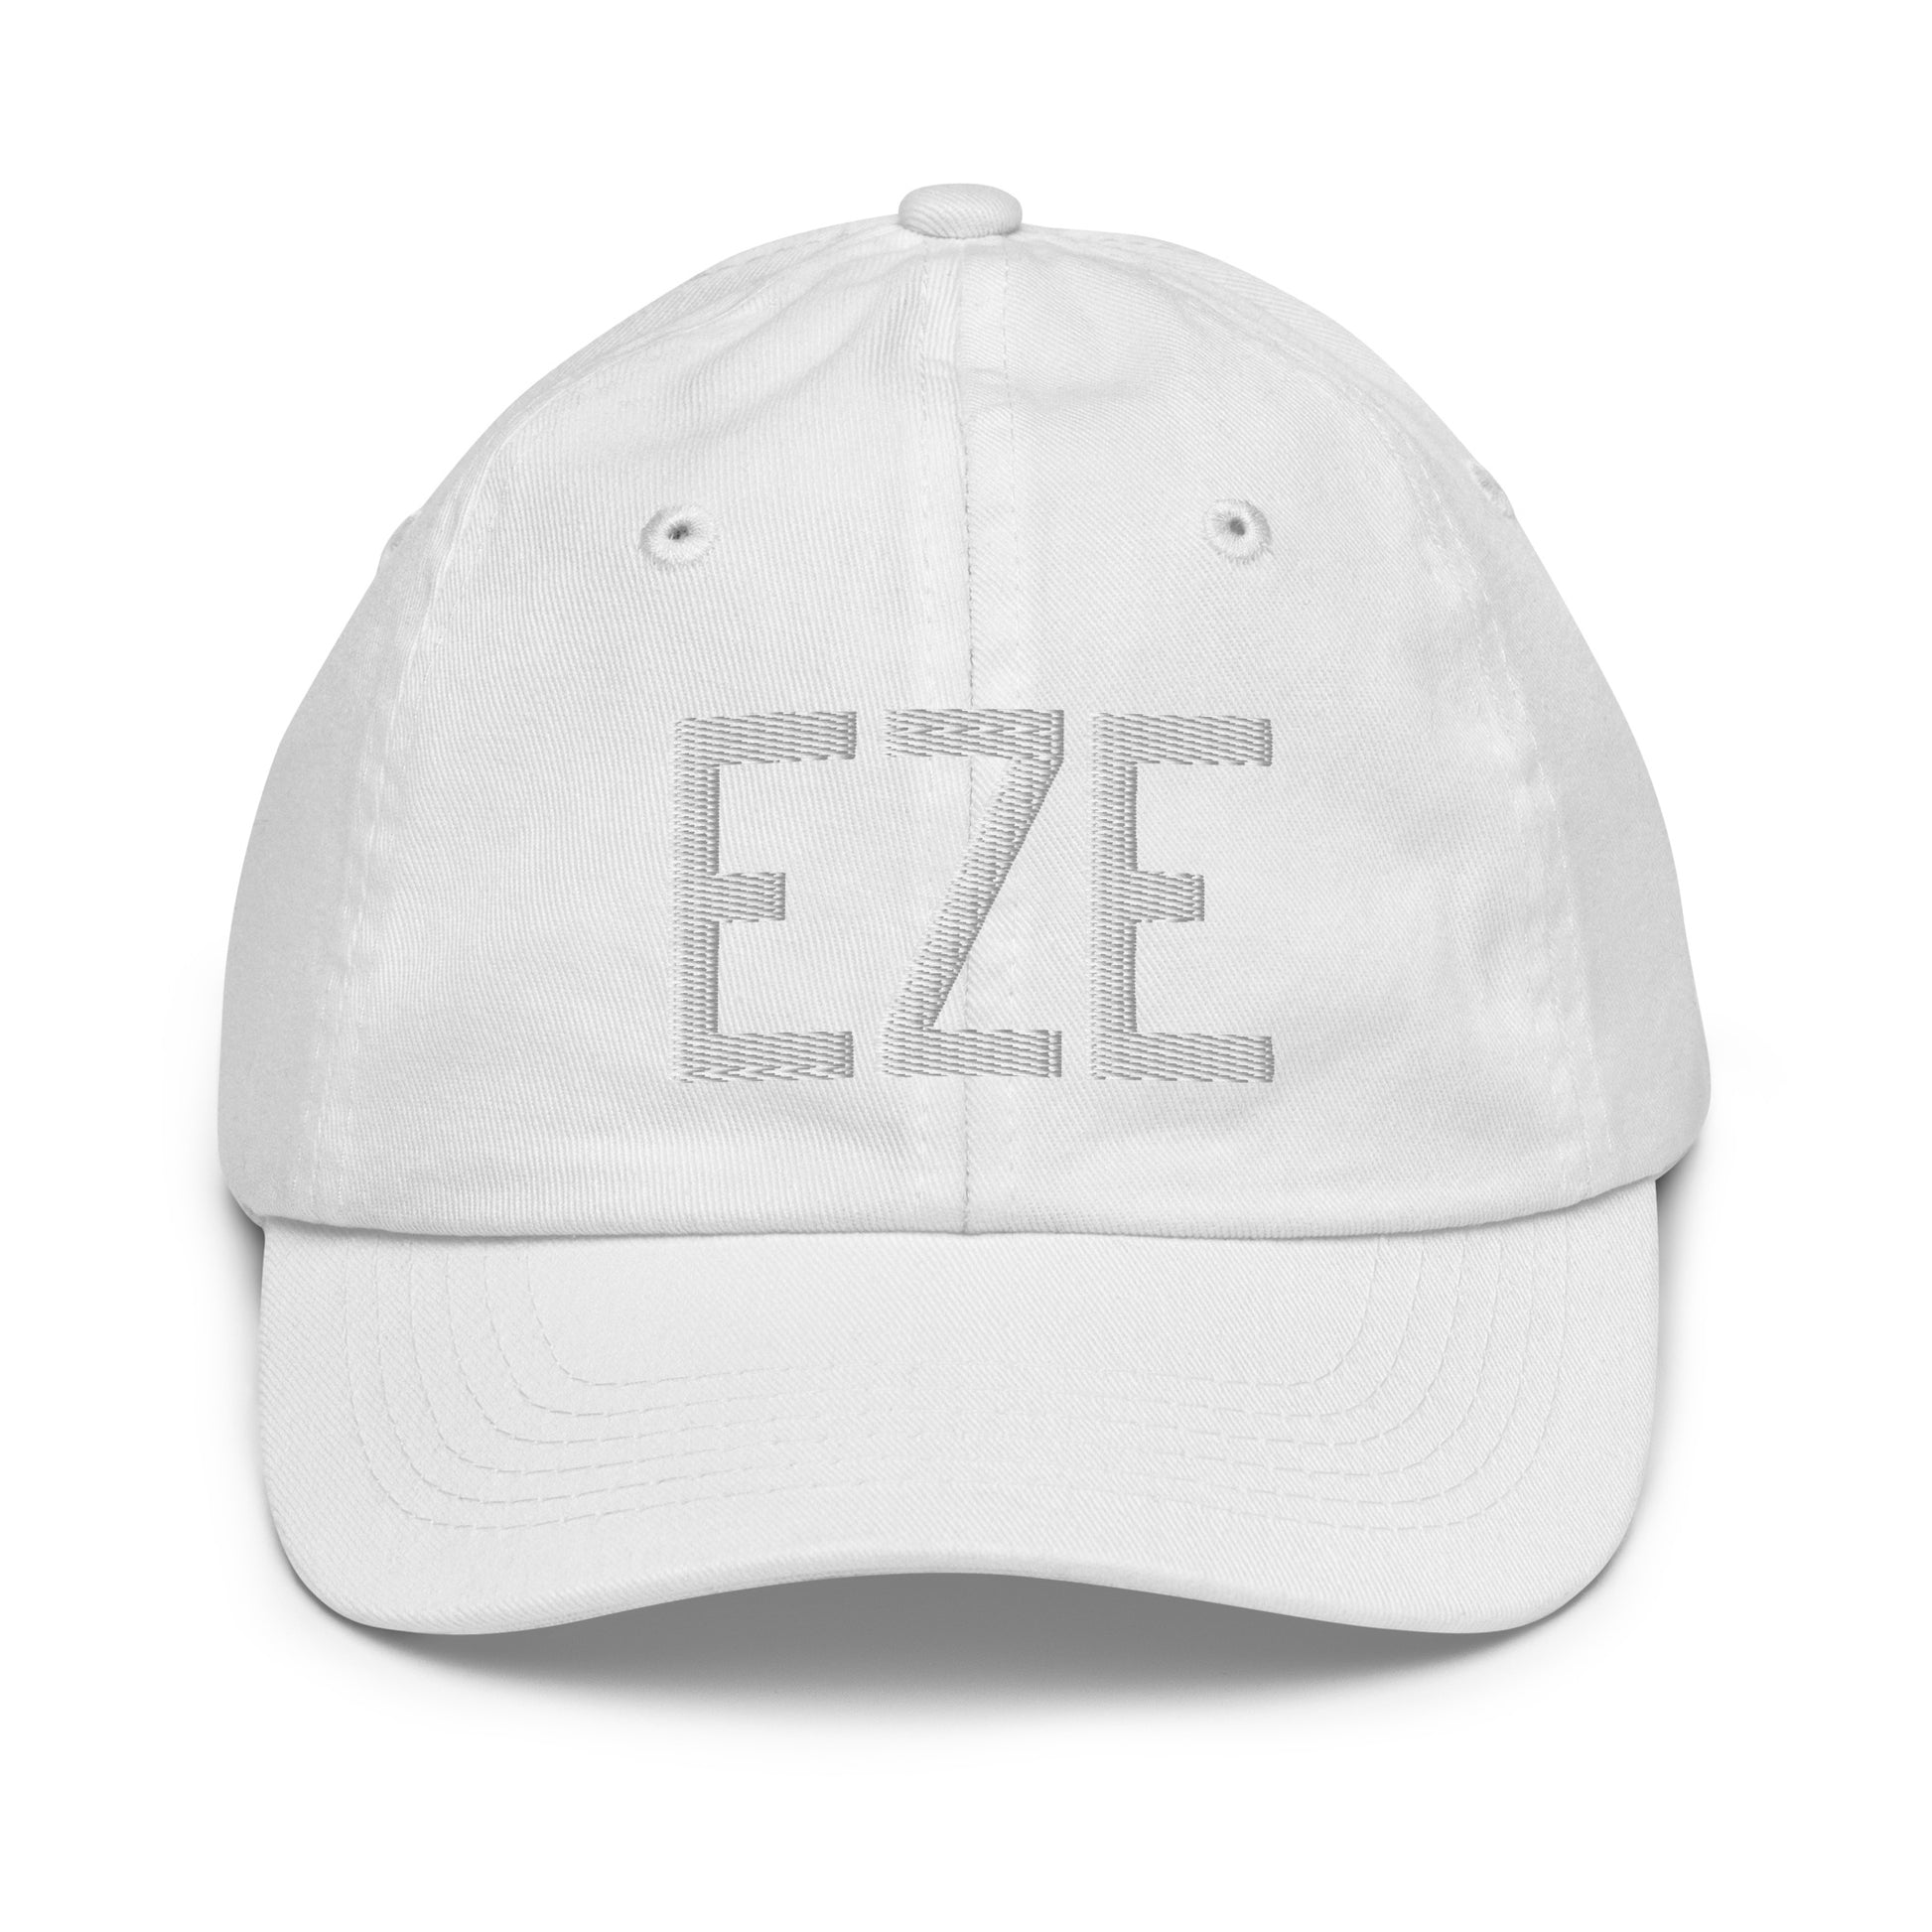 Airport Code Kid's Baseball Cap - White • EZE Buenos Aires • YHM Designs - Image 34